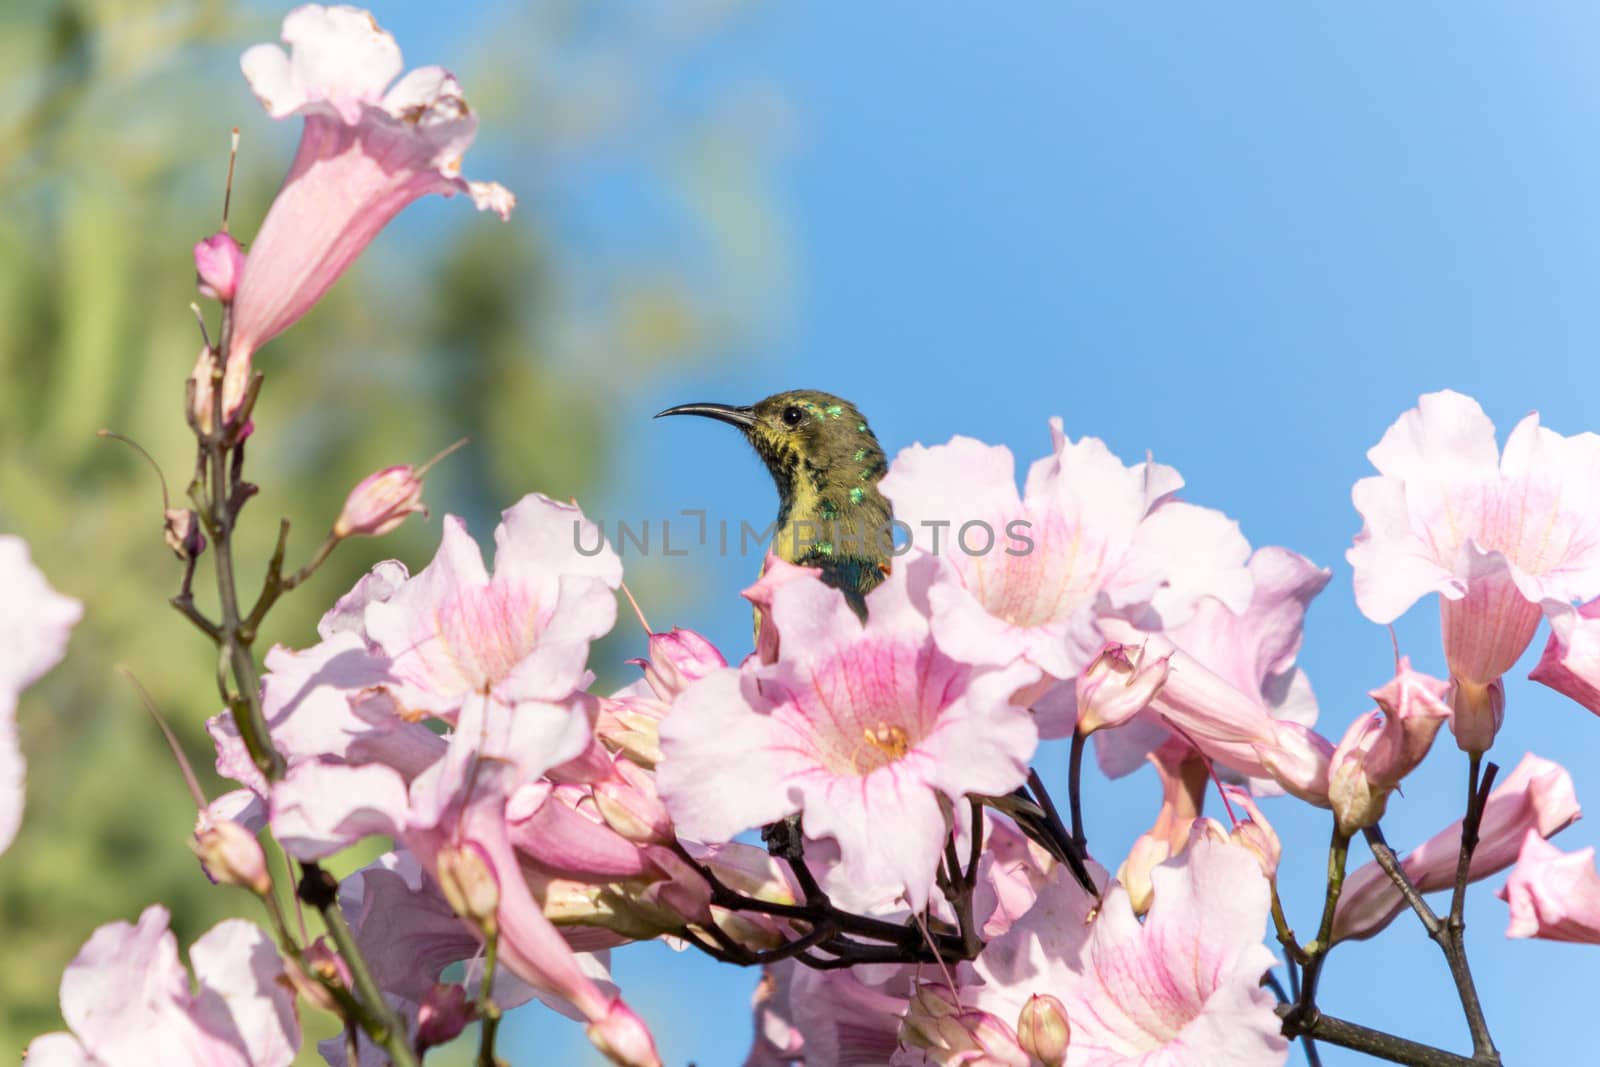 A beautiful small bird sitting on a twig filled with blooming flowers